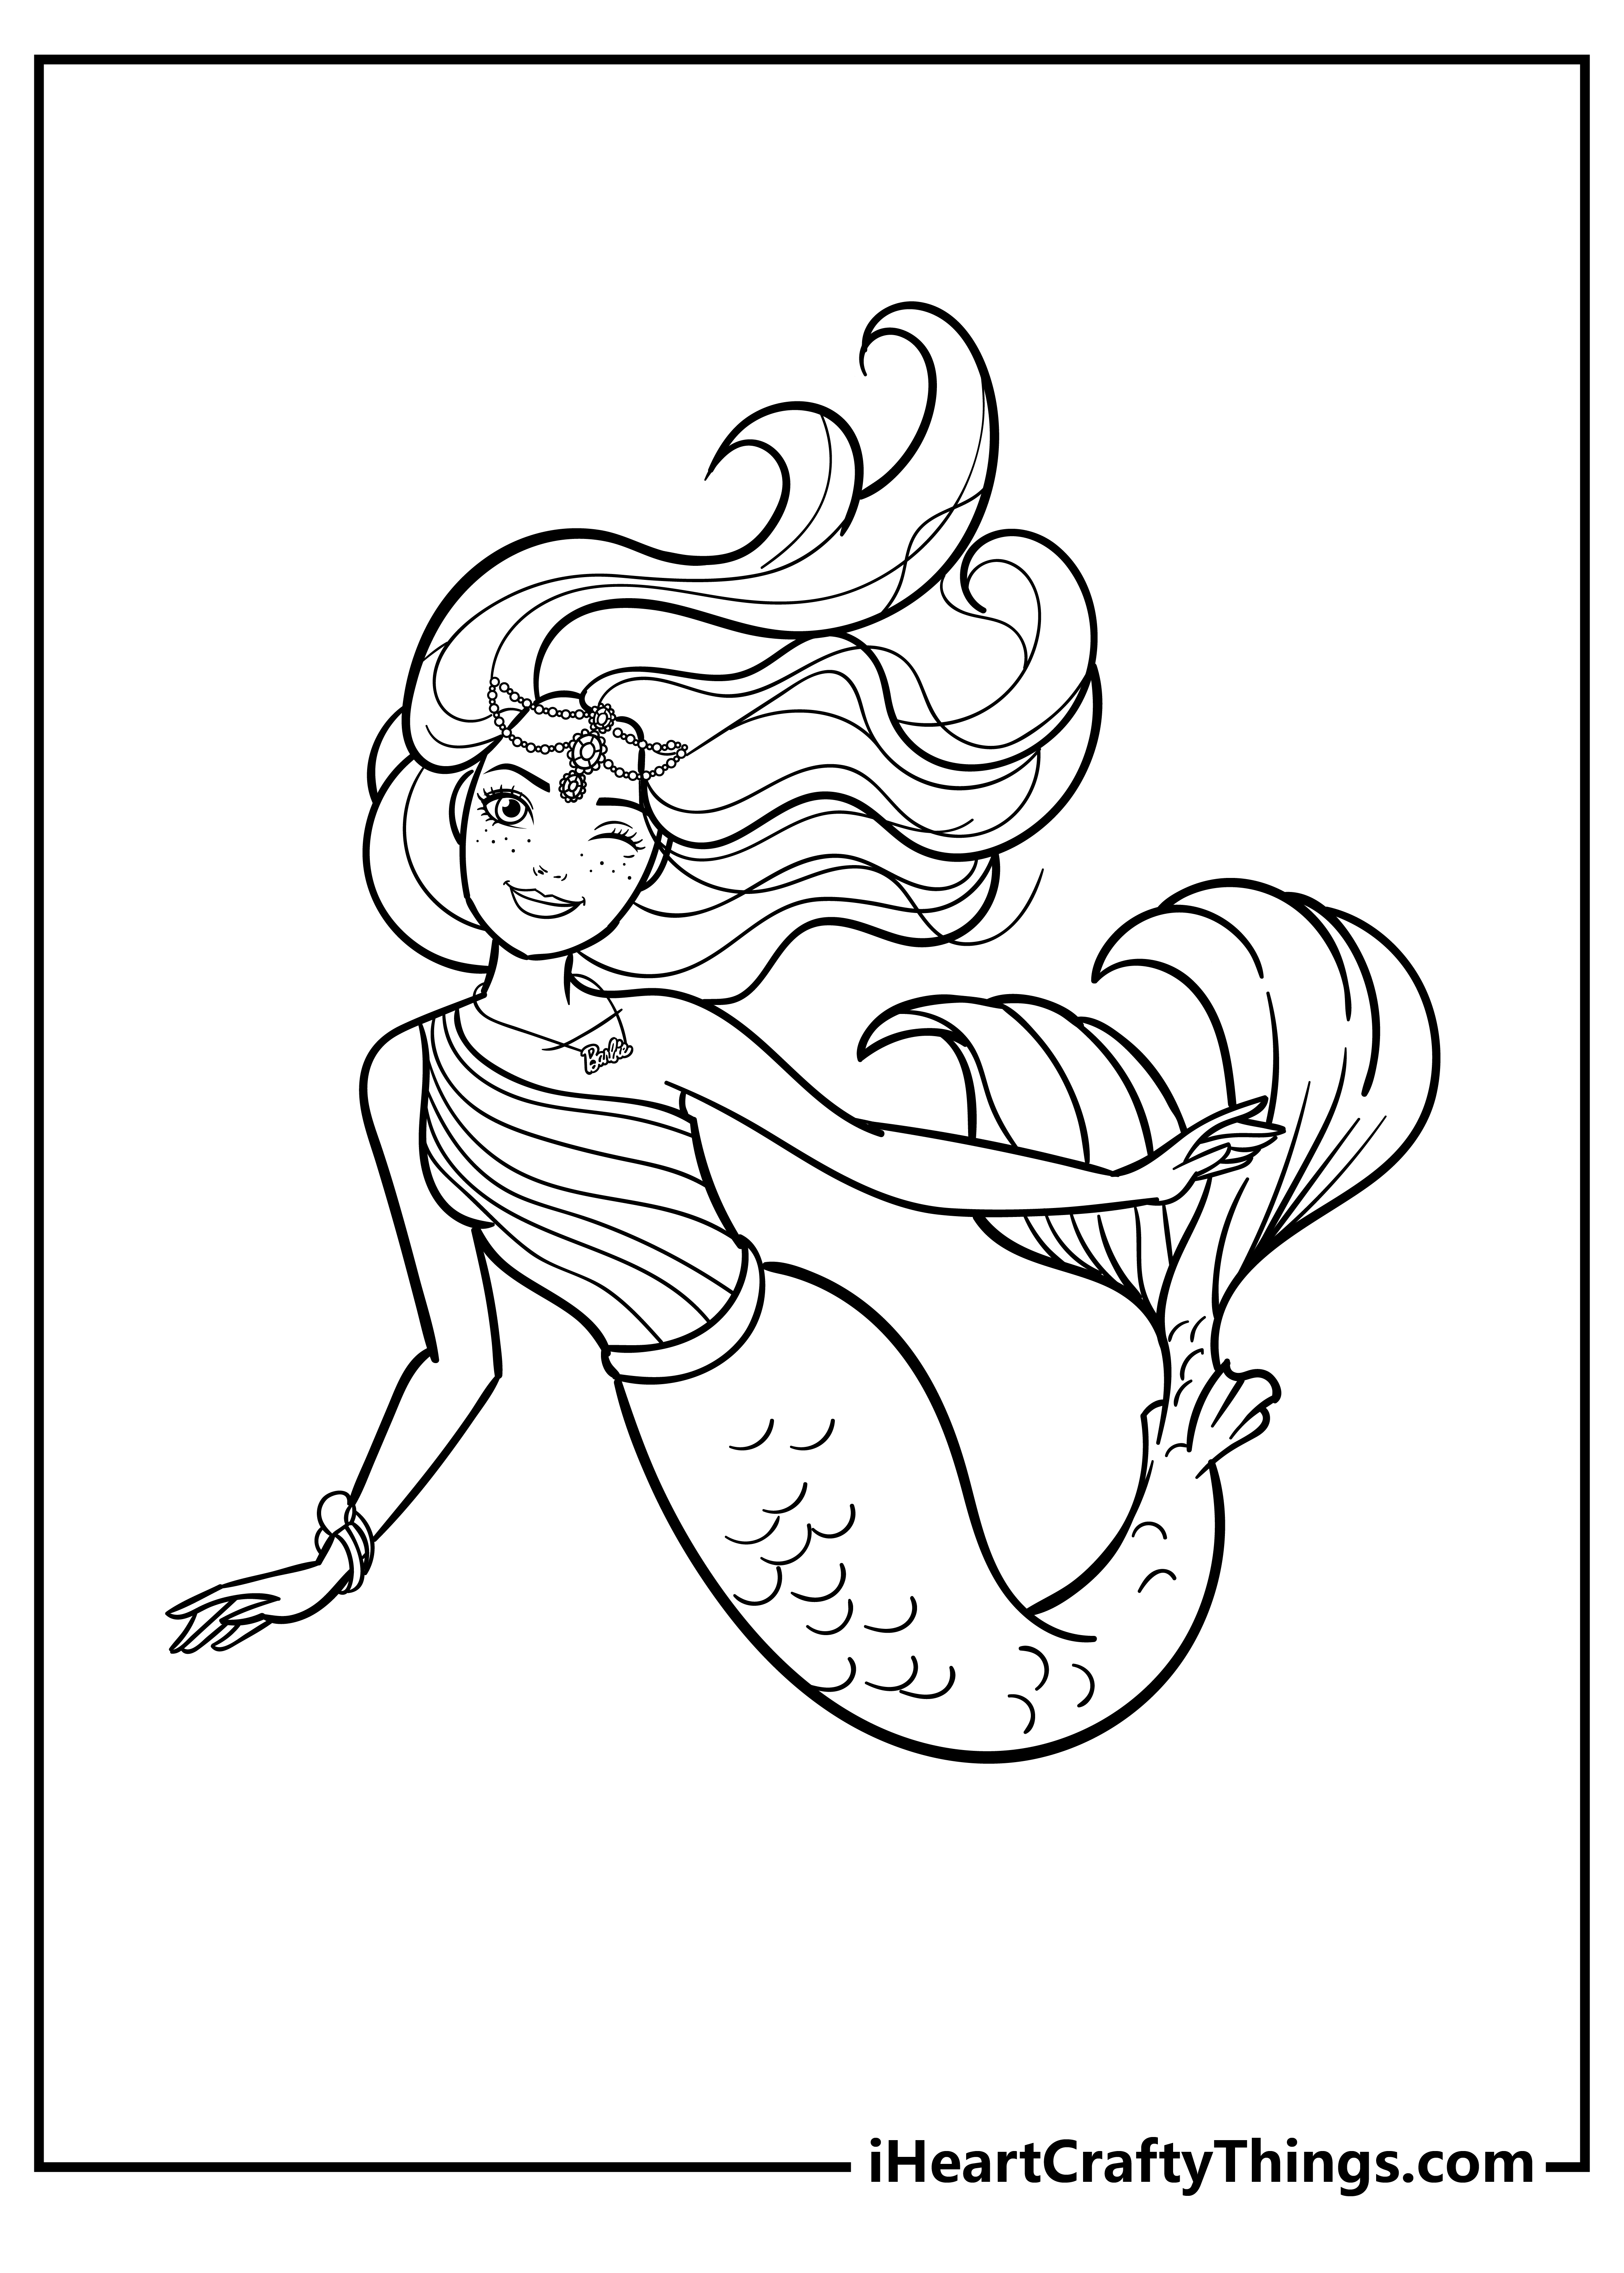 Barbie Mermaid Coloring Pages for kids free download